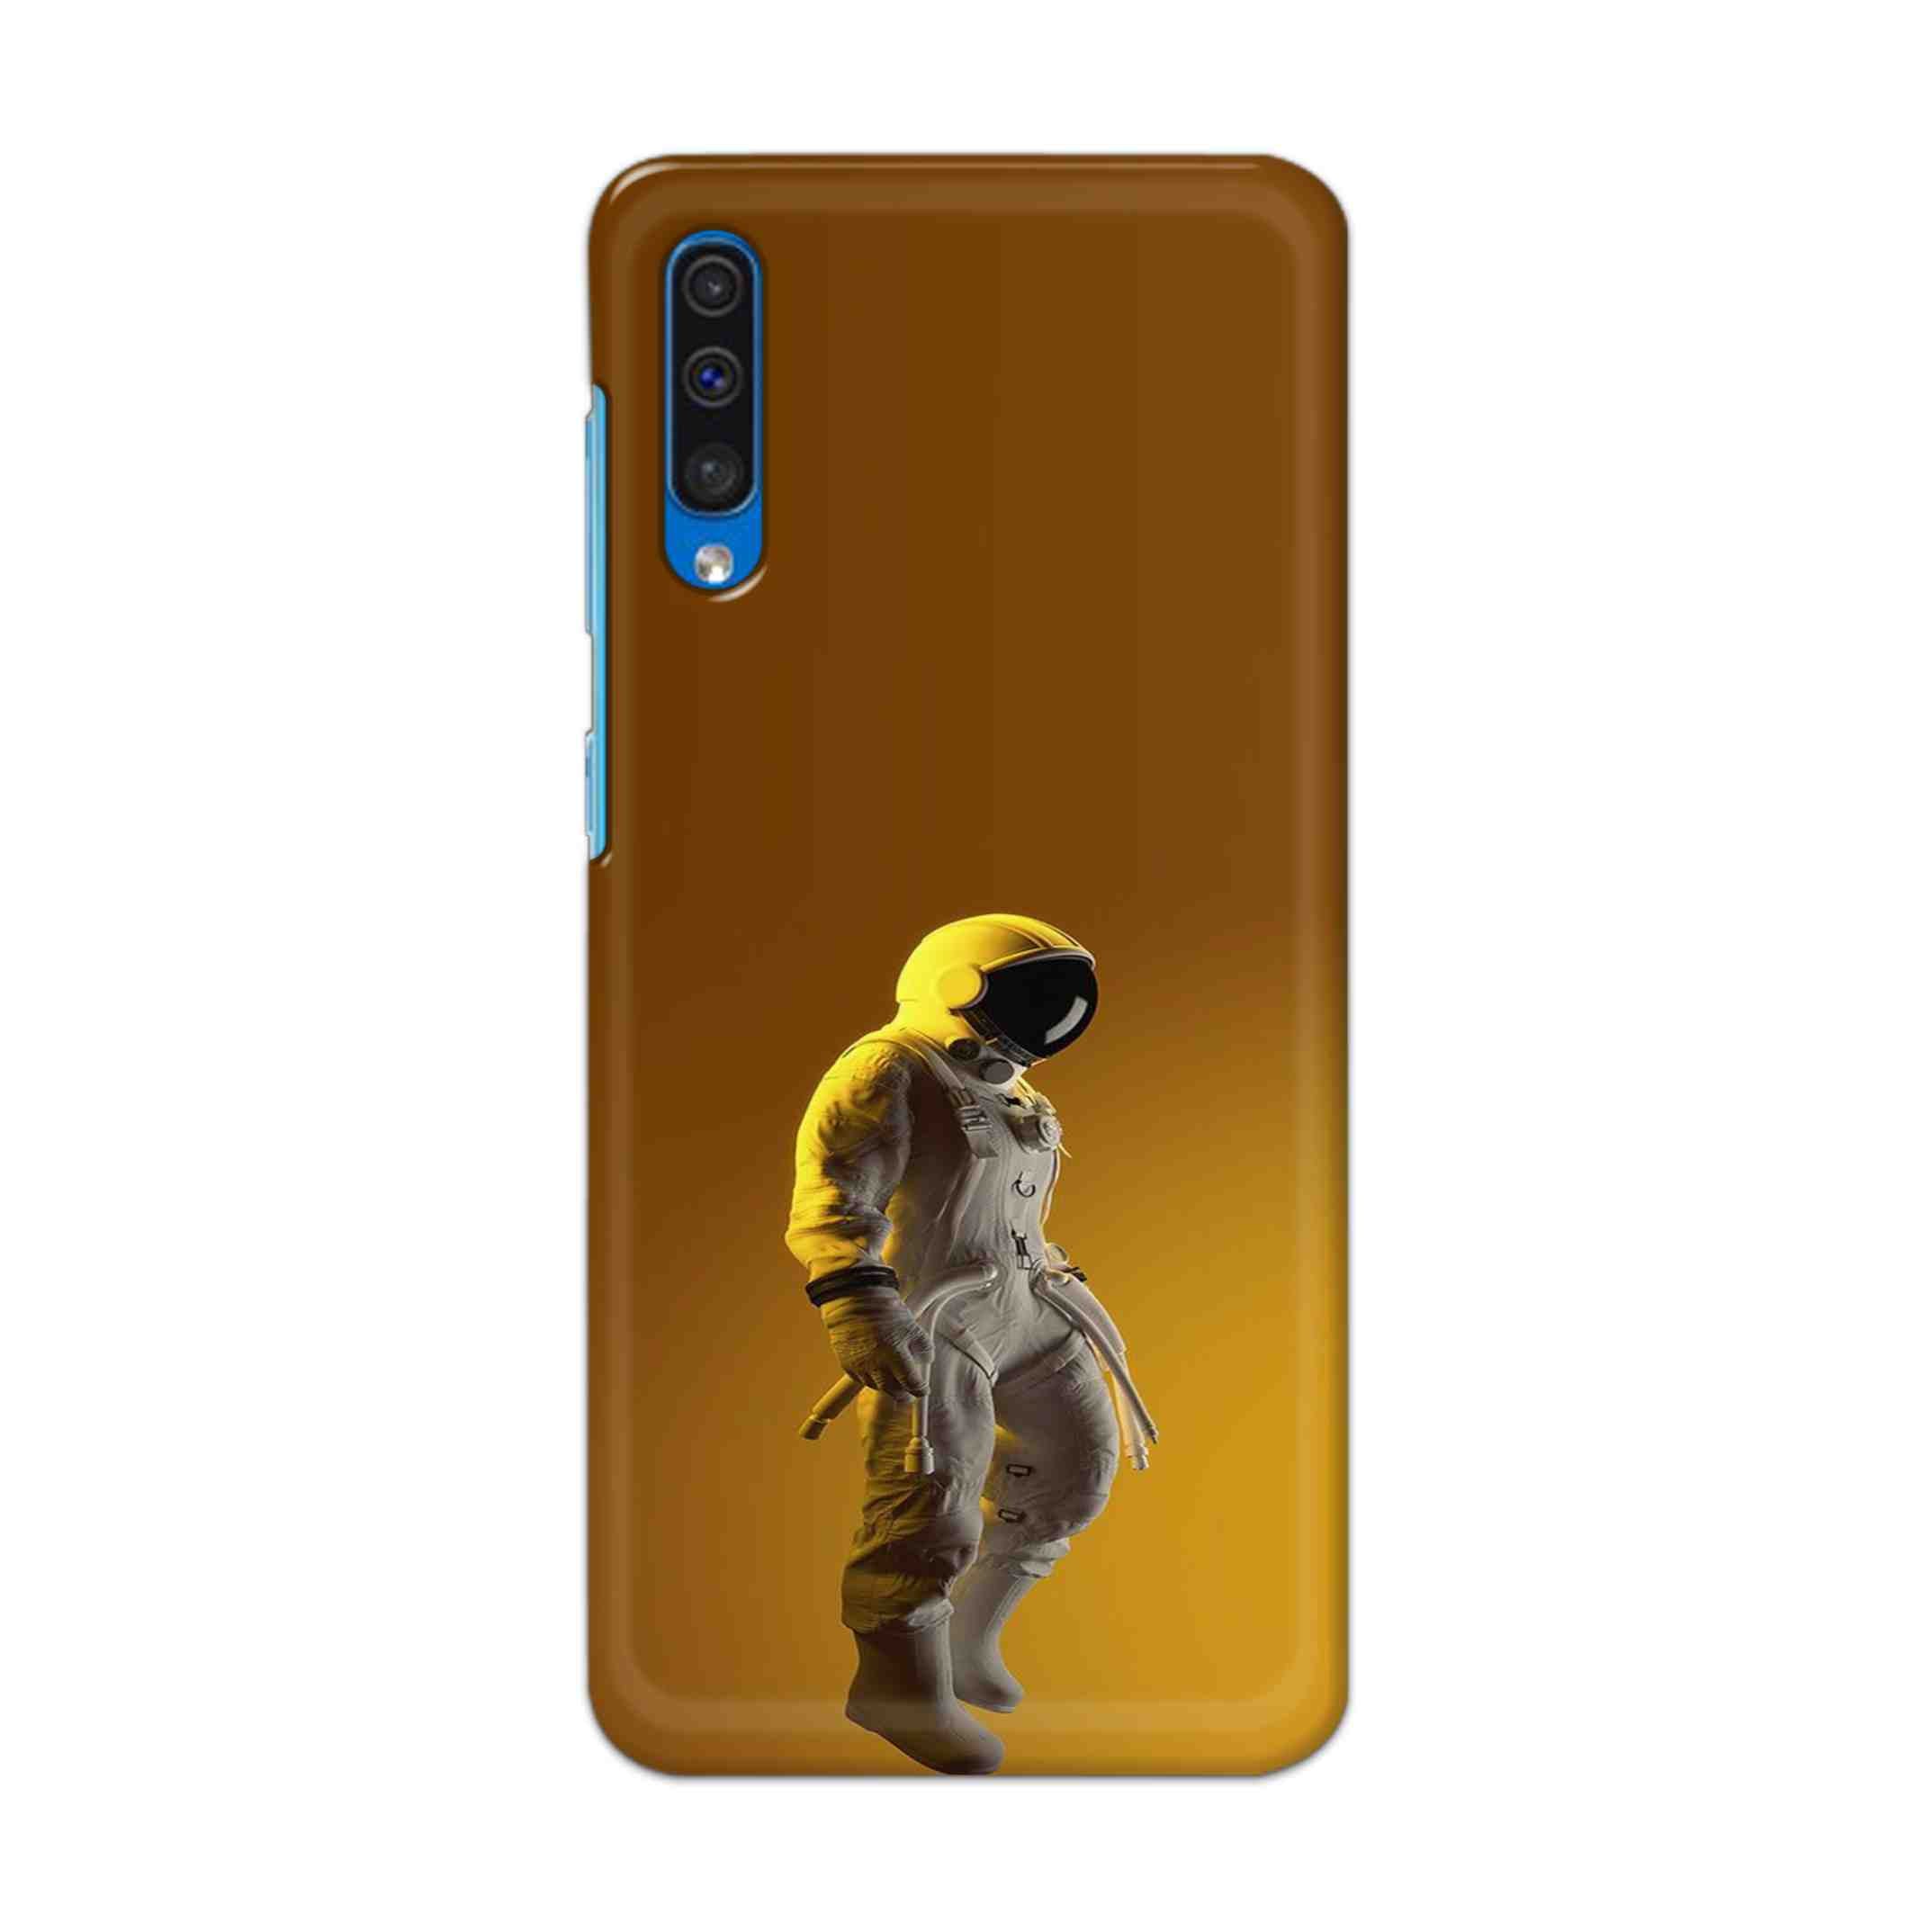 Buy Yellow Astronaut Hard Back Mobile Phone Case Cover For Samsung Galaxy A50 / A50s / A30s Online